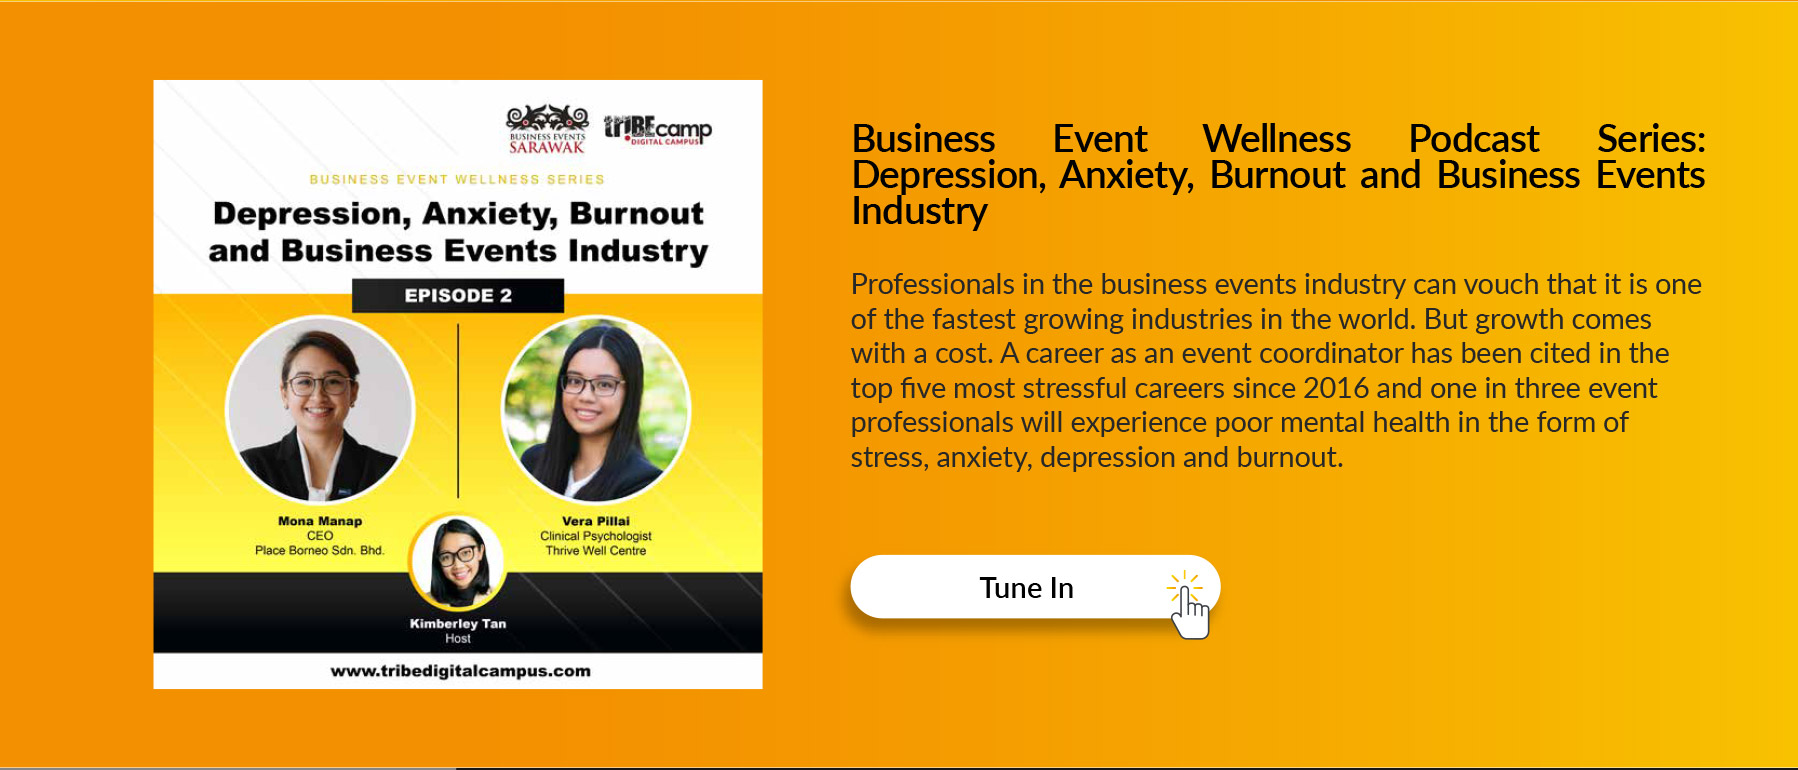 Business Event Wellness Podcast Series: Depression, Anxiety, Burnout and Business Events Industry